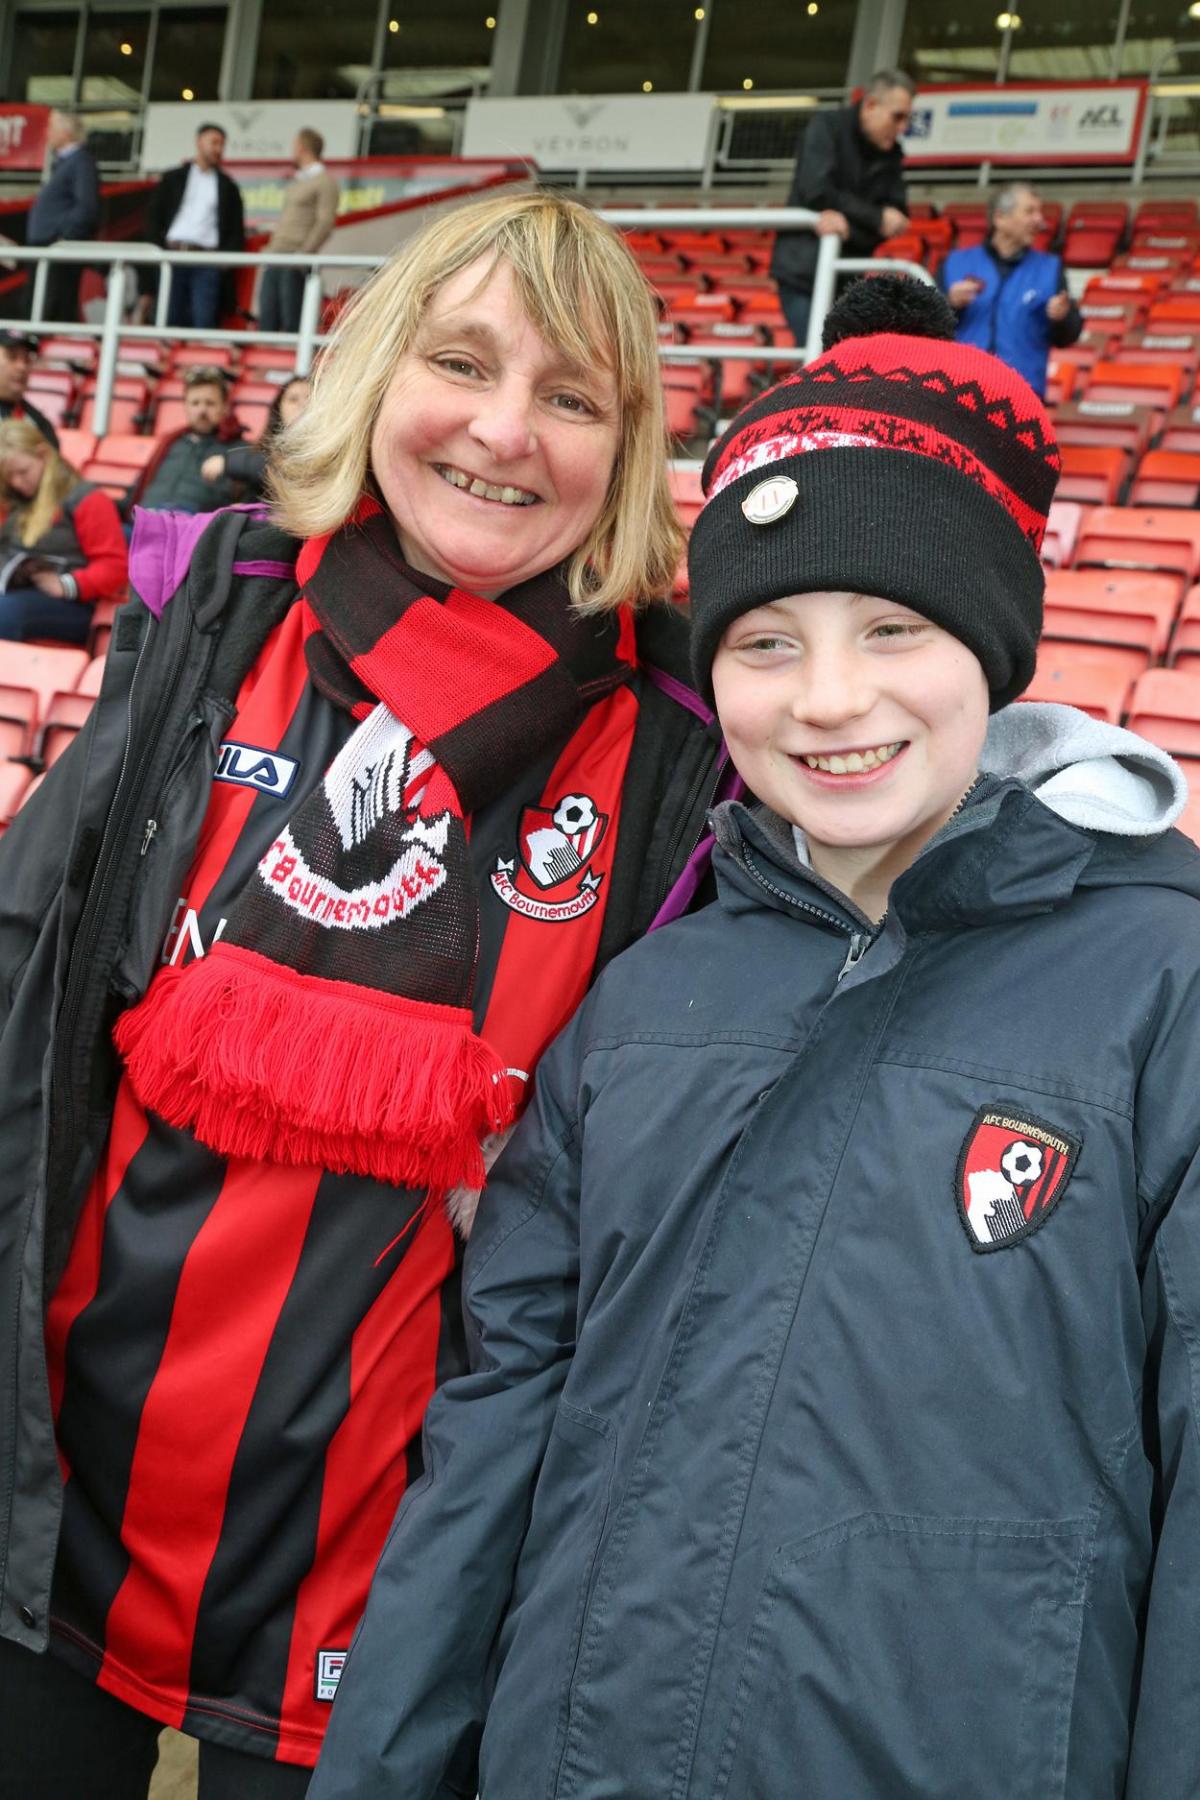 All the photos from the cherries matches in February 2015